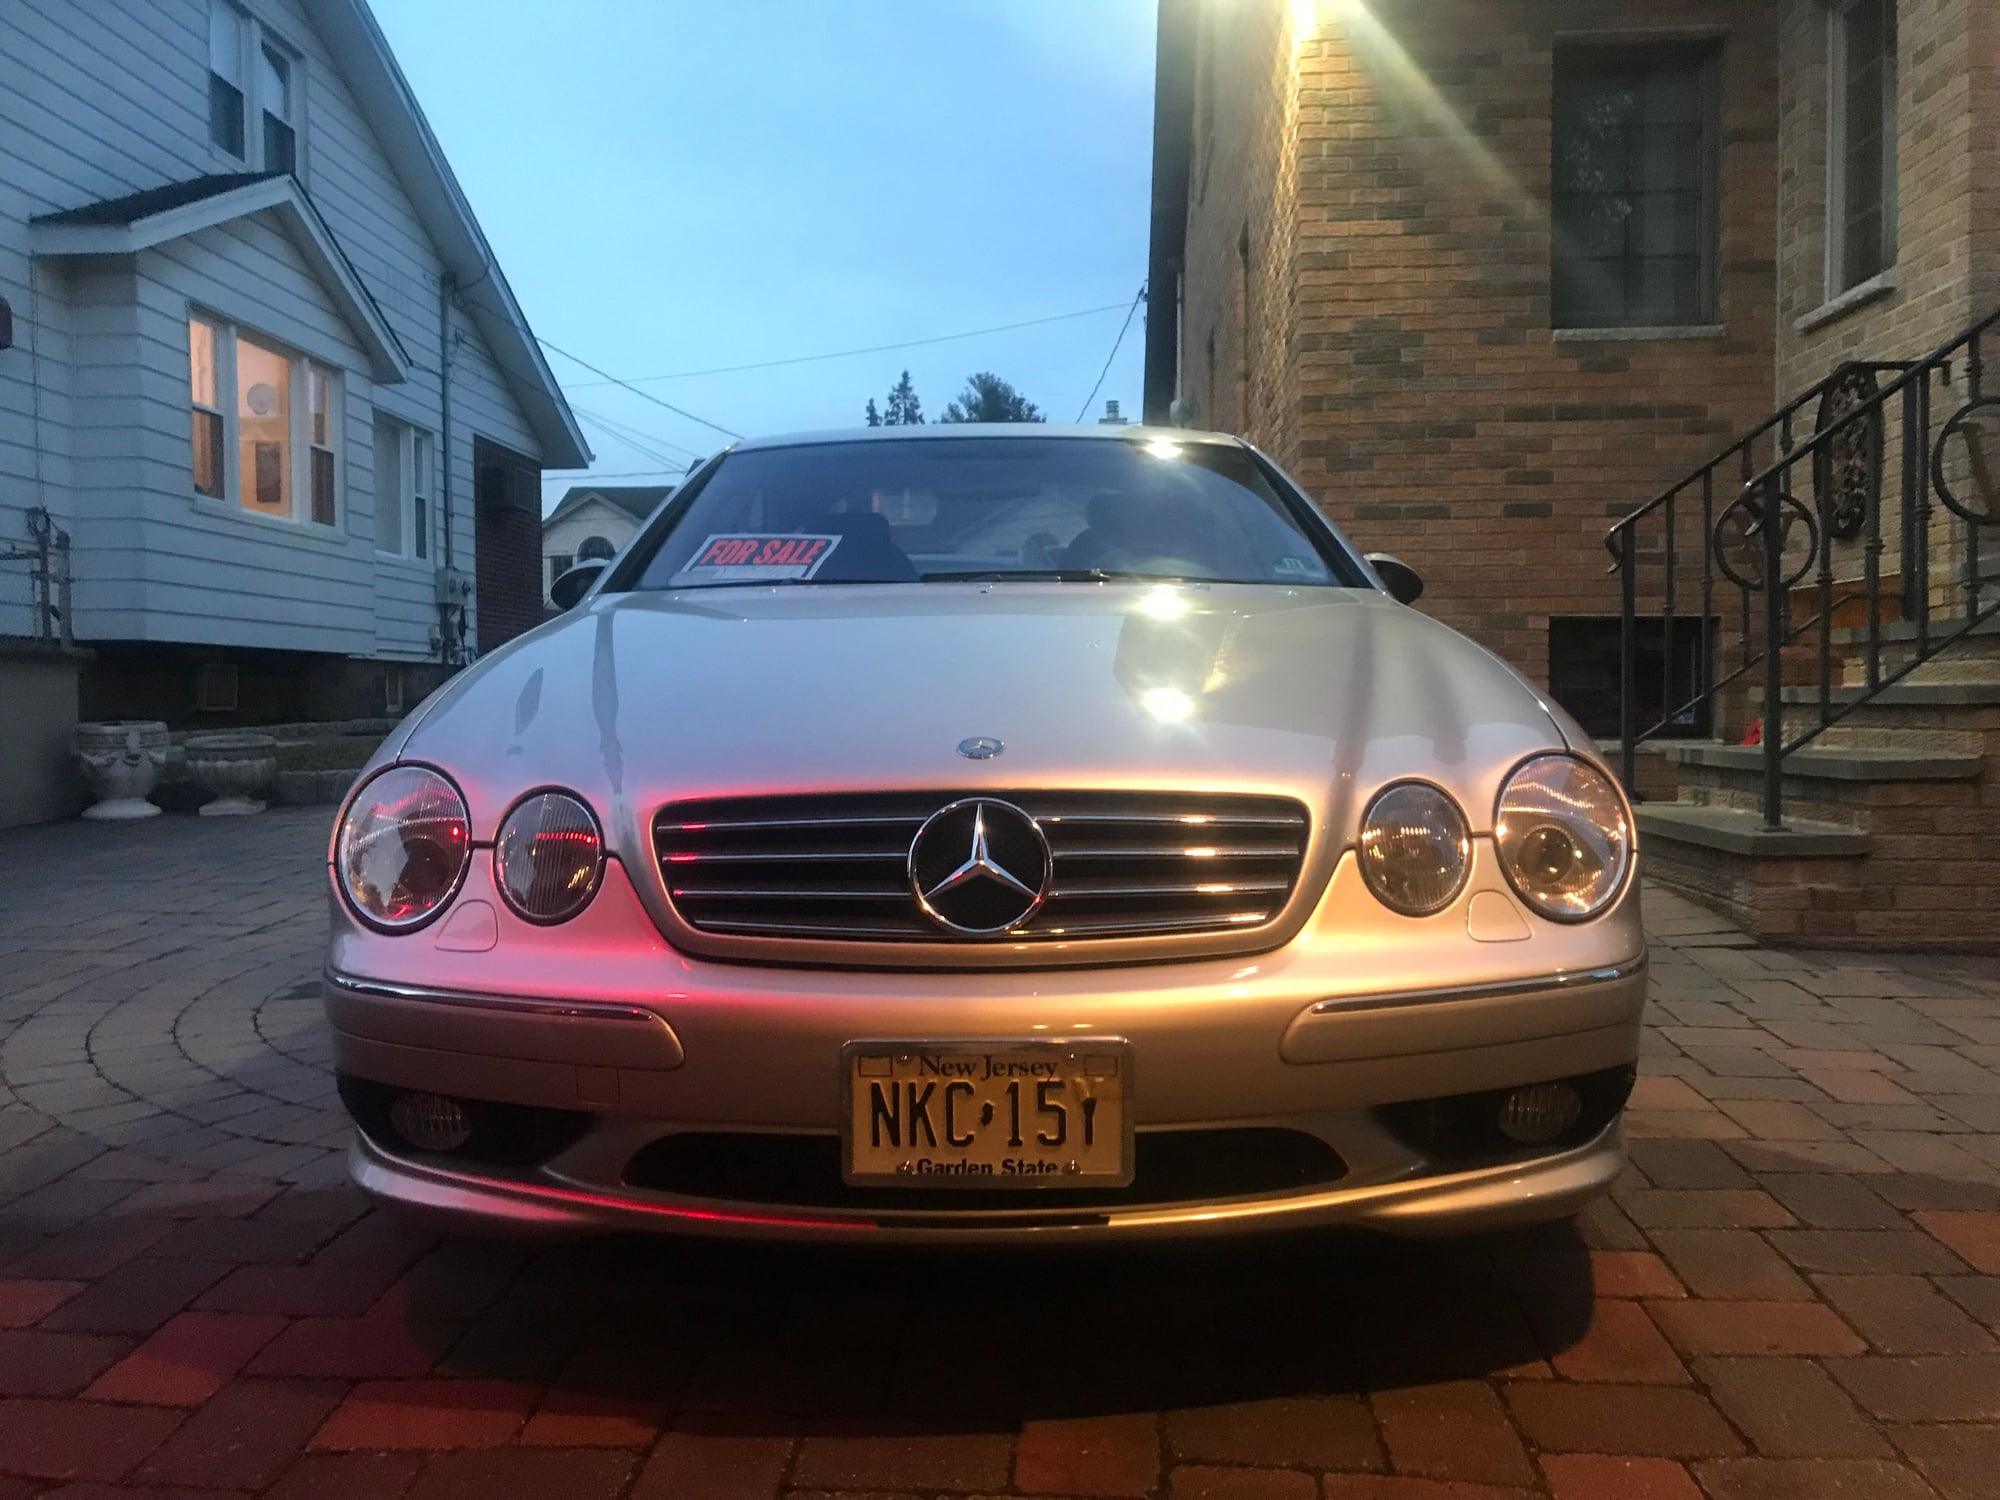 2002 Mercedes-Benz CL500 - 2002 CL500 *BRAND NEW CONDITION* 3264 Miles! *ONE OWNER* - Used - VIN WDBPJ75JX2A030463 - 3,264 Miles - 8 cyl - 2WD - Automatic - Coupe - Silver - Cliffside Park, NJ 07010, United States